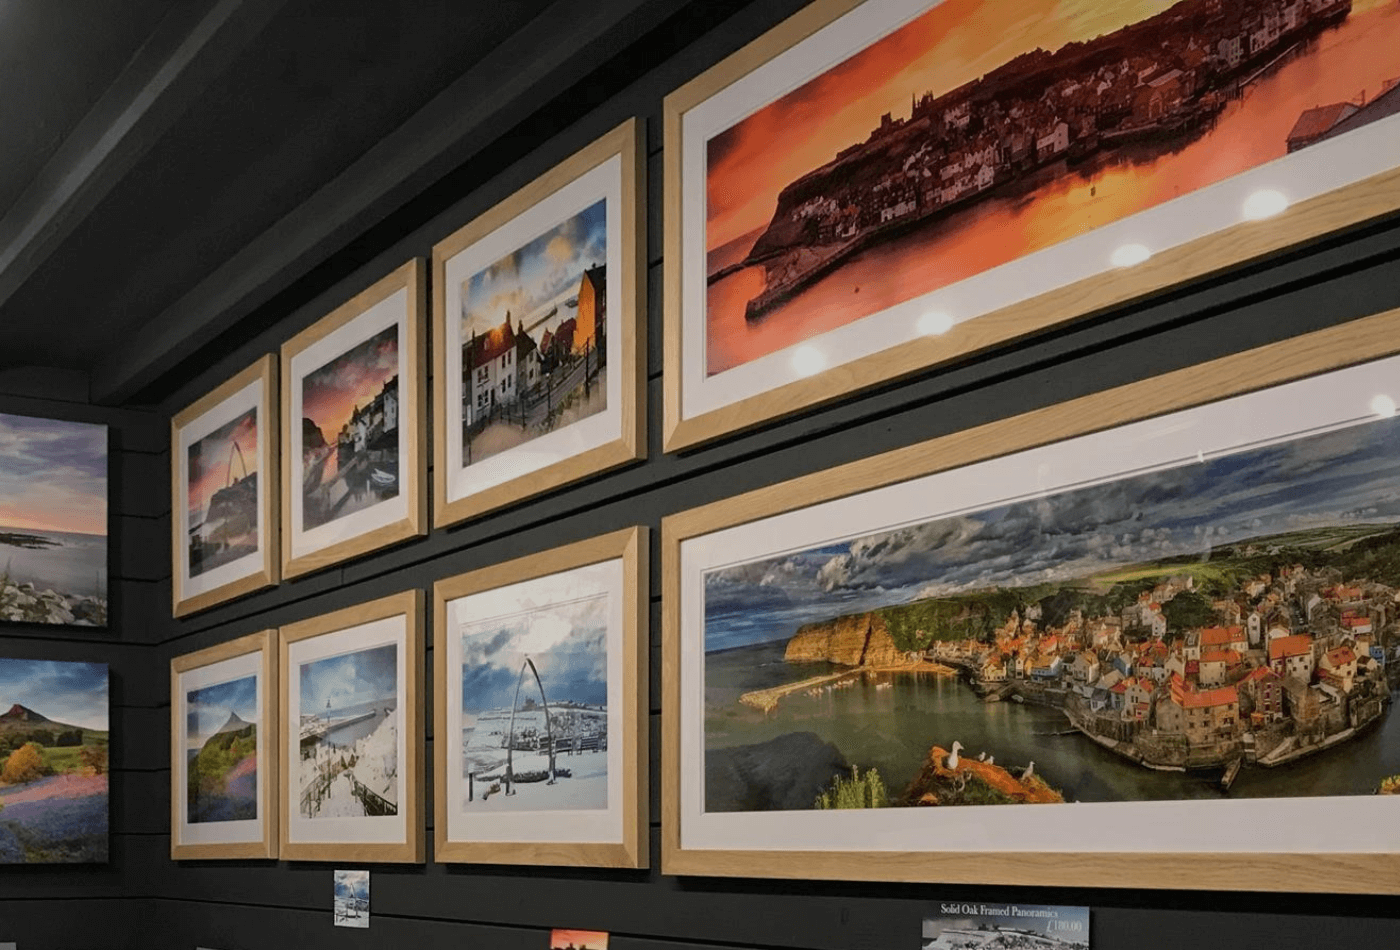 photos from the North Yorkshire Gallery